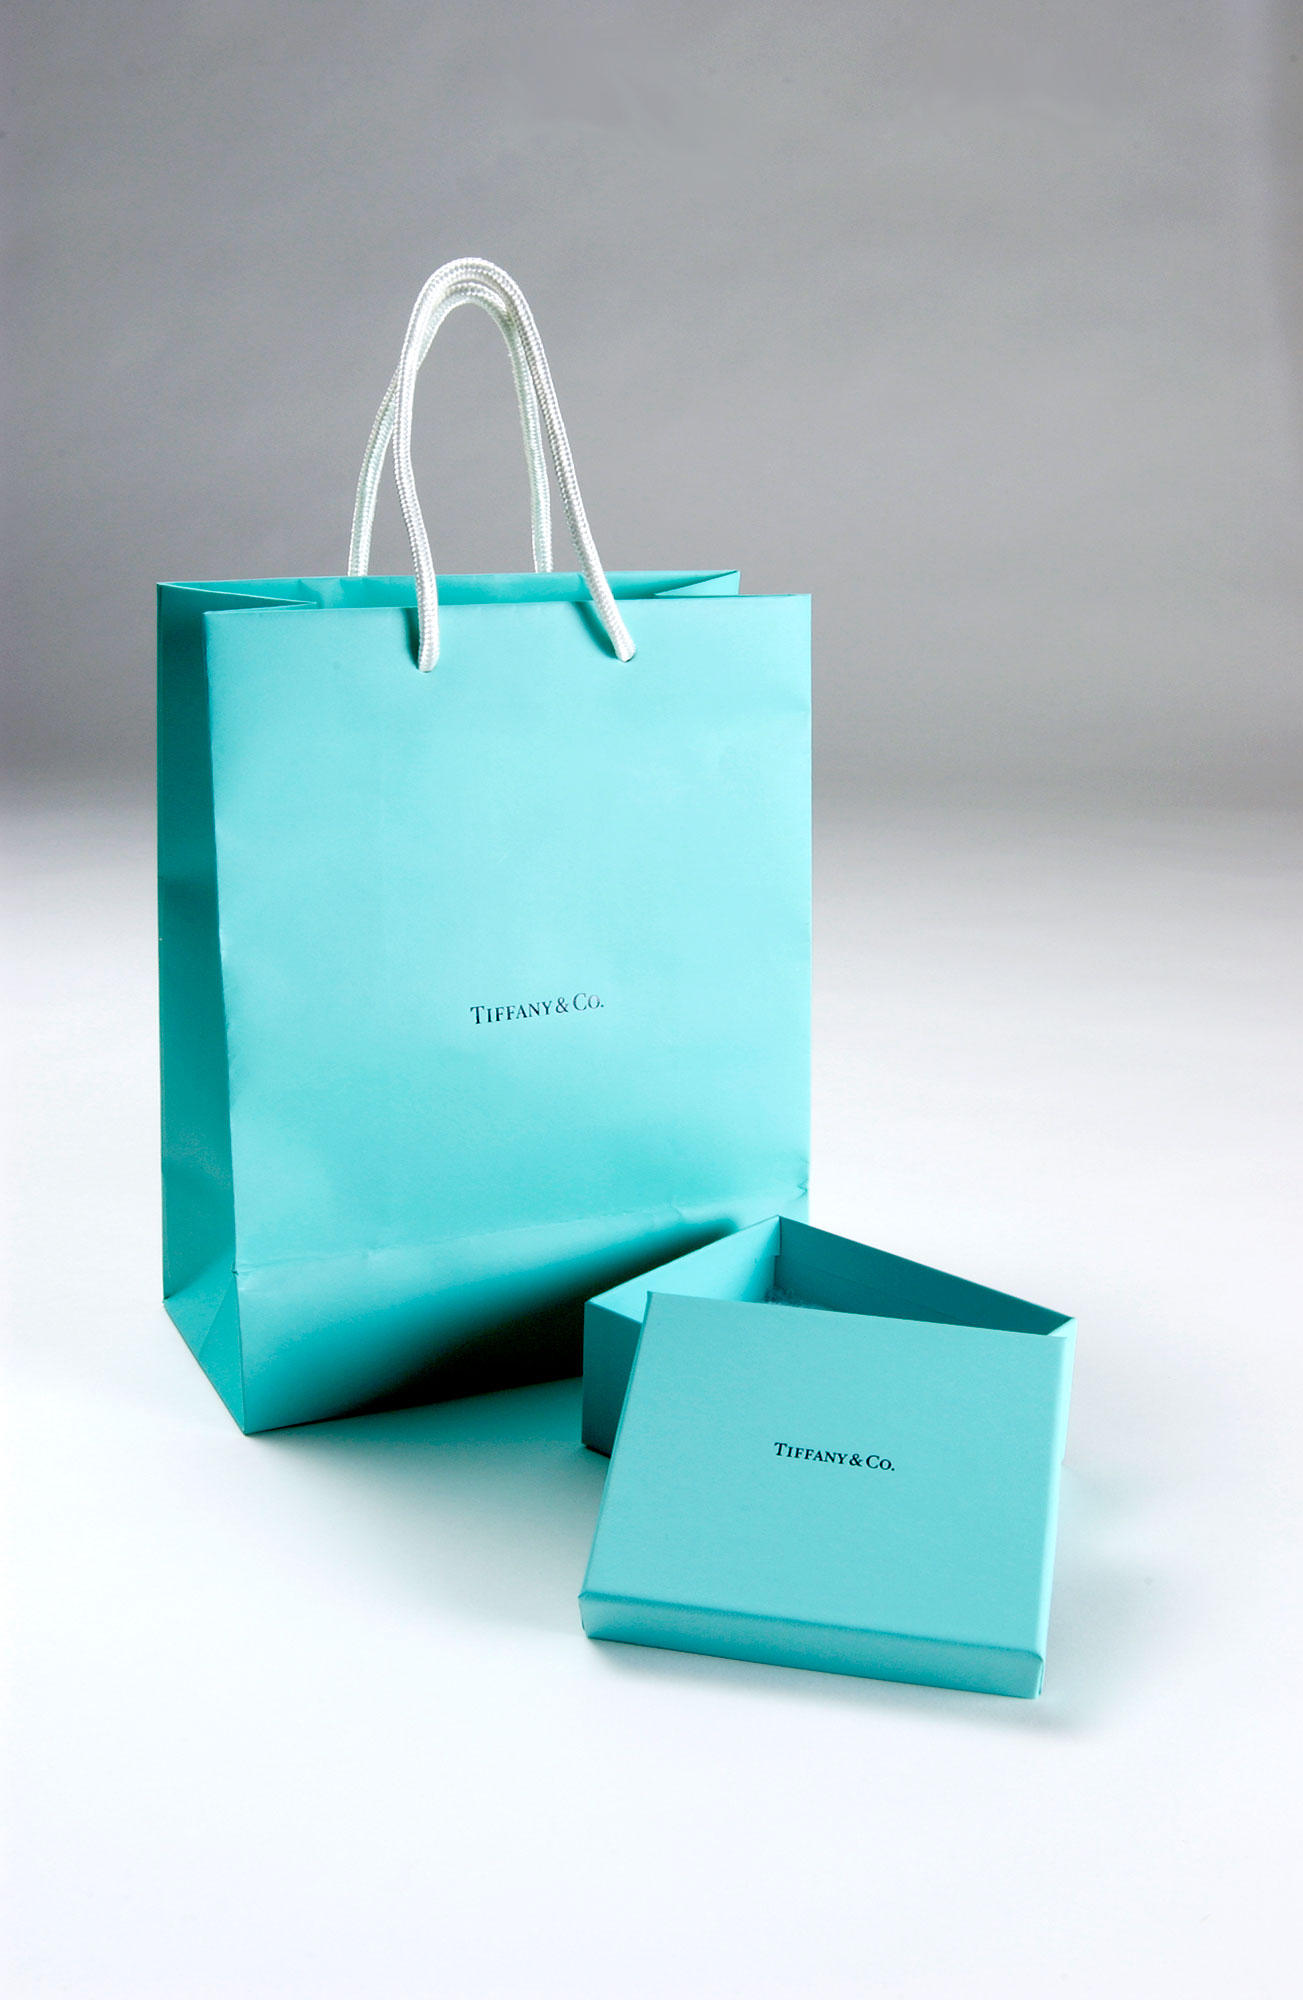 tiffany & co bags and boxes